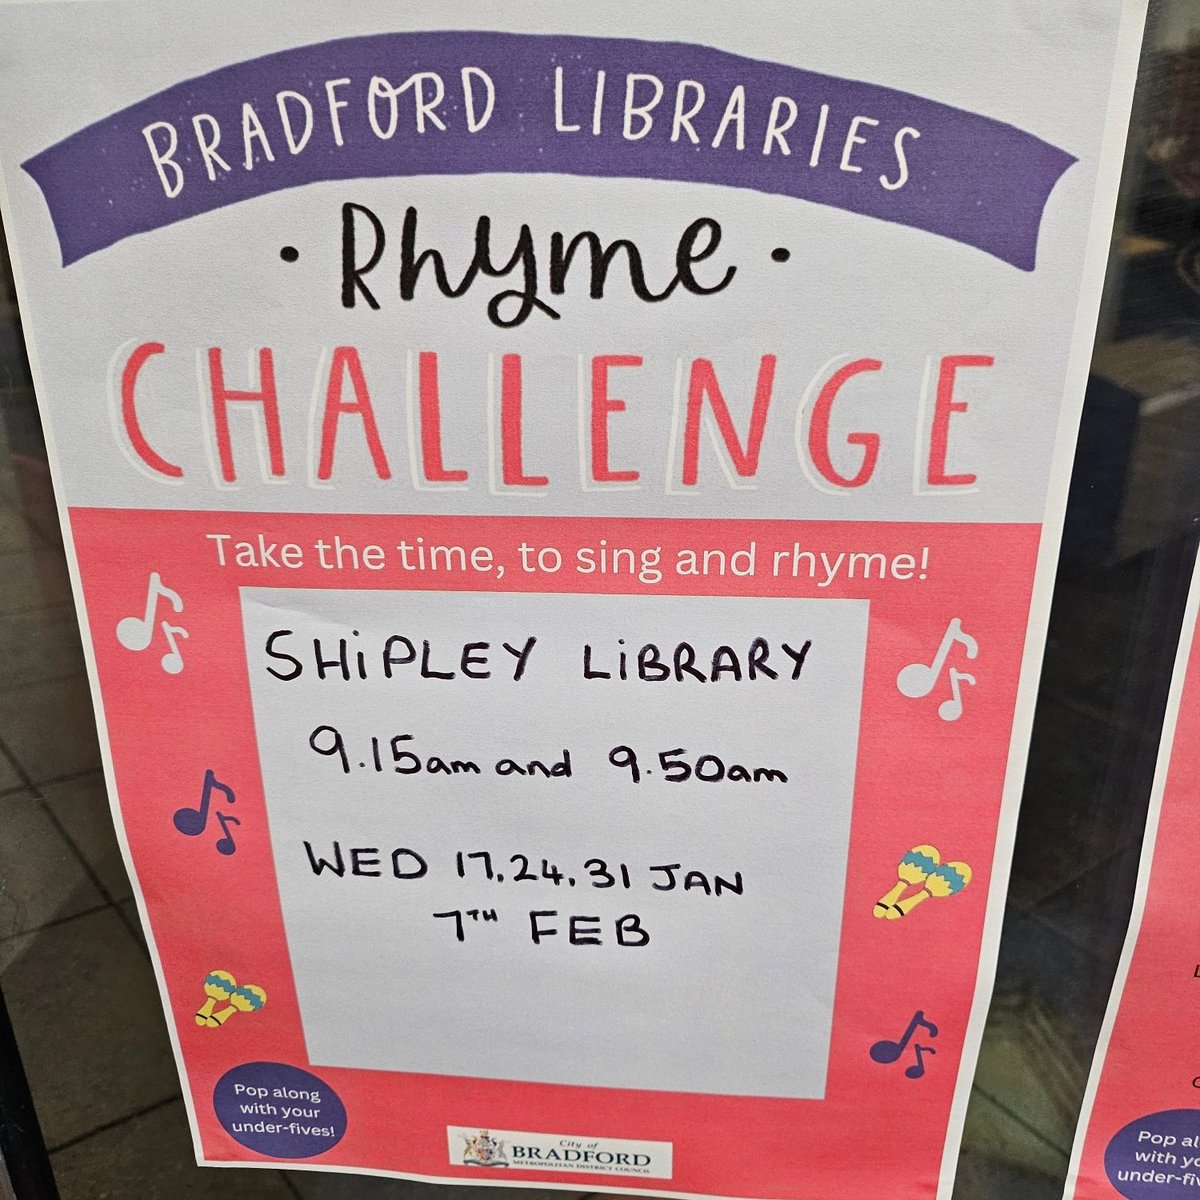 A big shout out to Shipley Library on #WorldBookDay 
A great, warm, welcoming space for toddlers, reading, crafting, singing, working and meeting.
#lovelibraries